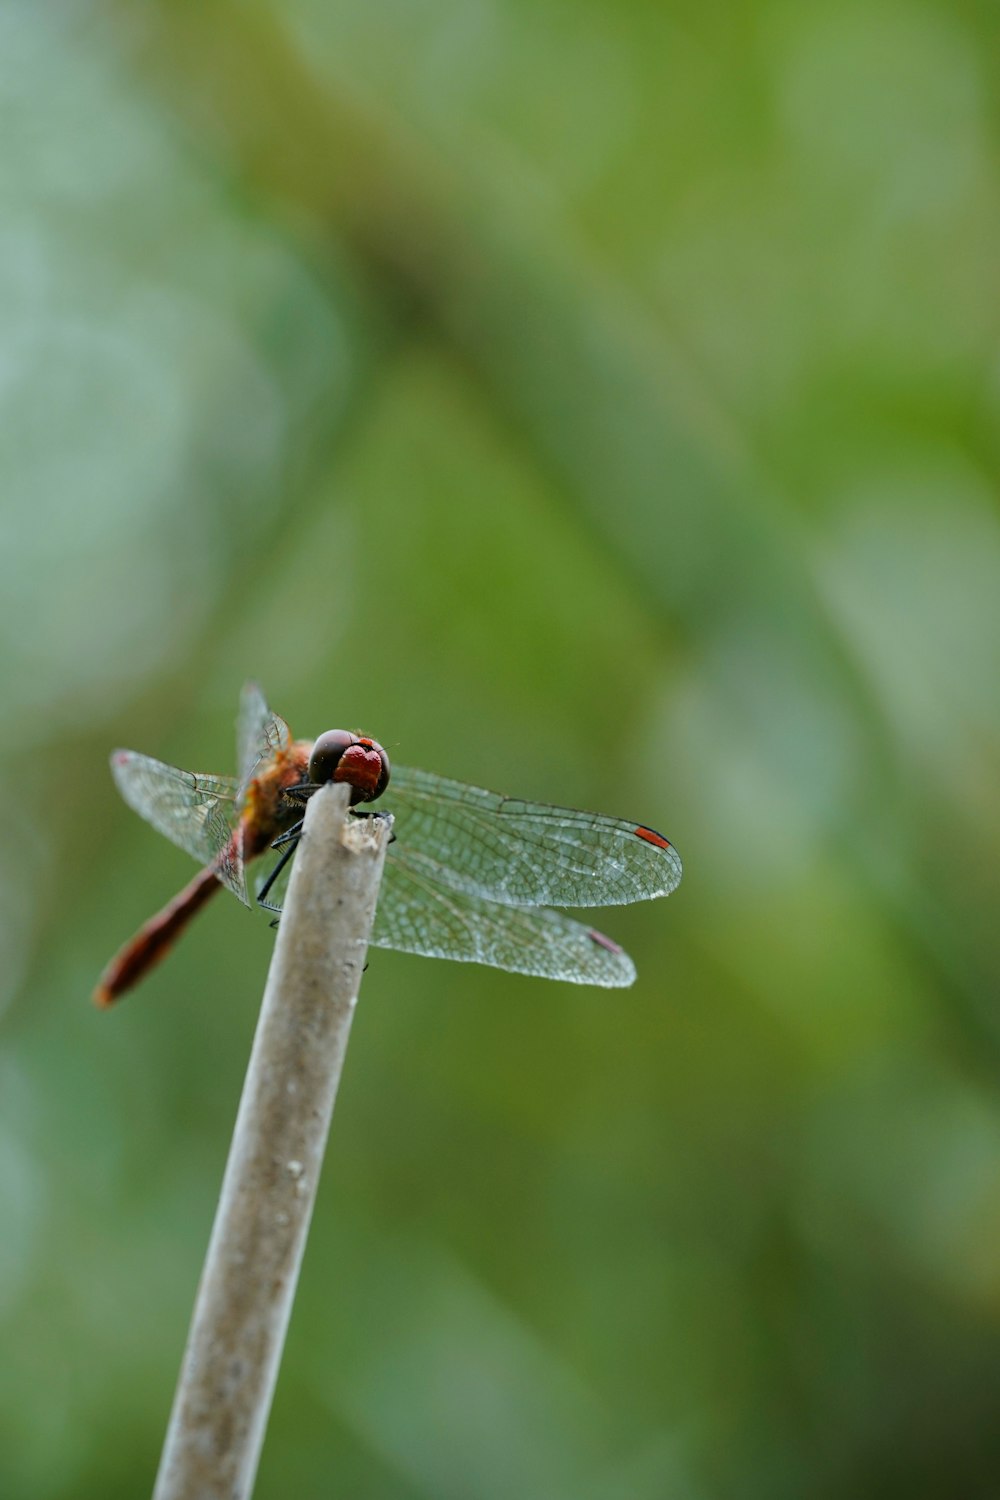 red and black dragonfly perched on brown stick in close up photography during daytime